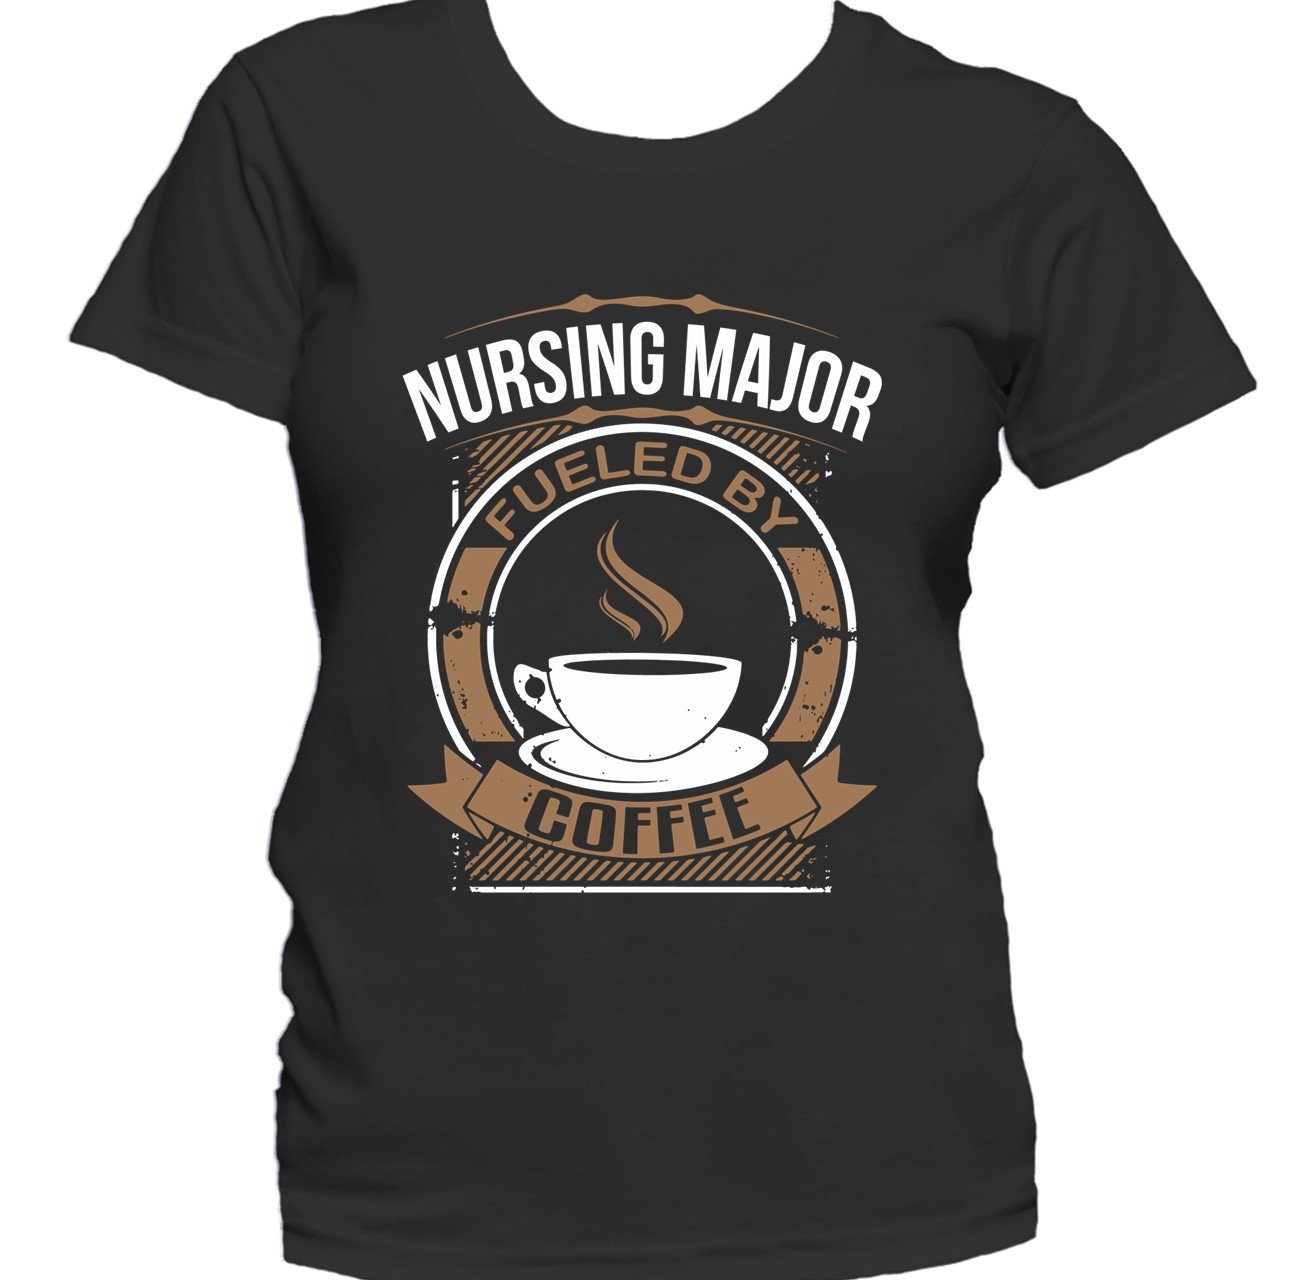 Nursing Major Fueled By Coffee Funny College Student Women's T-Shirt